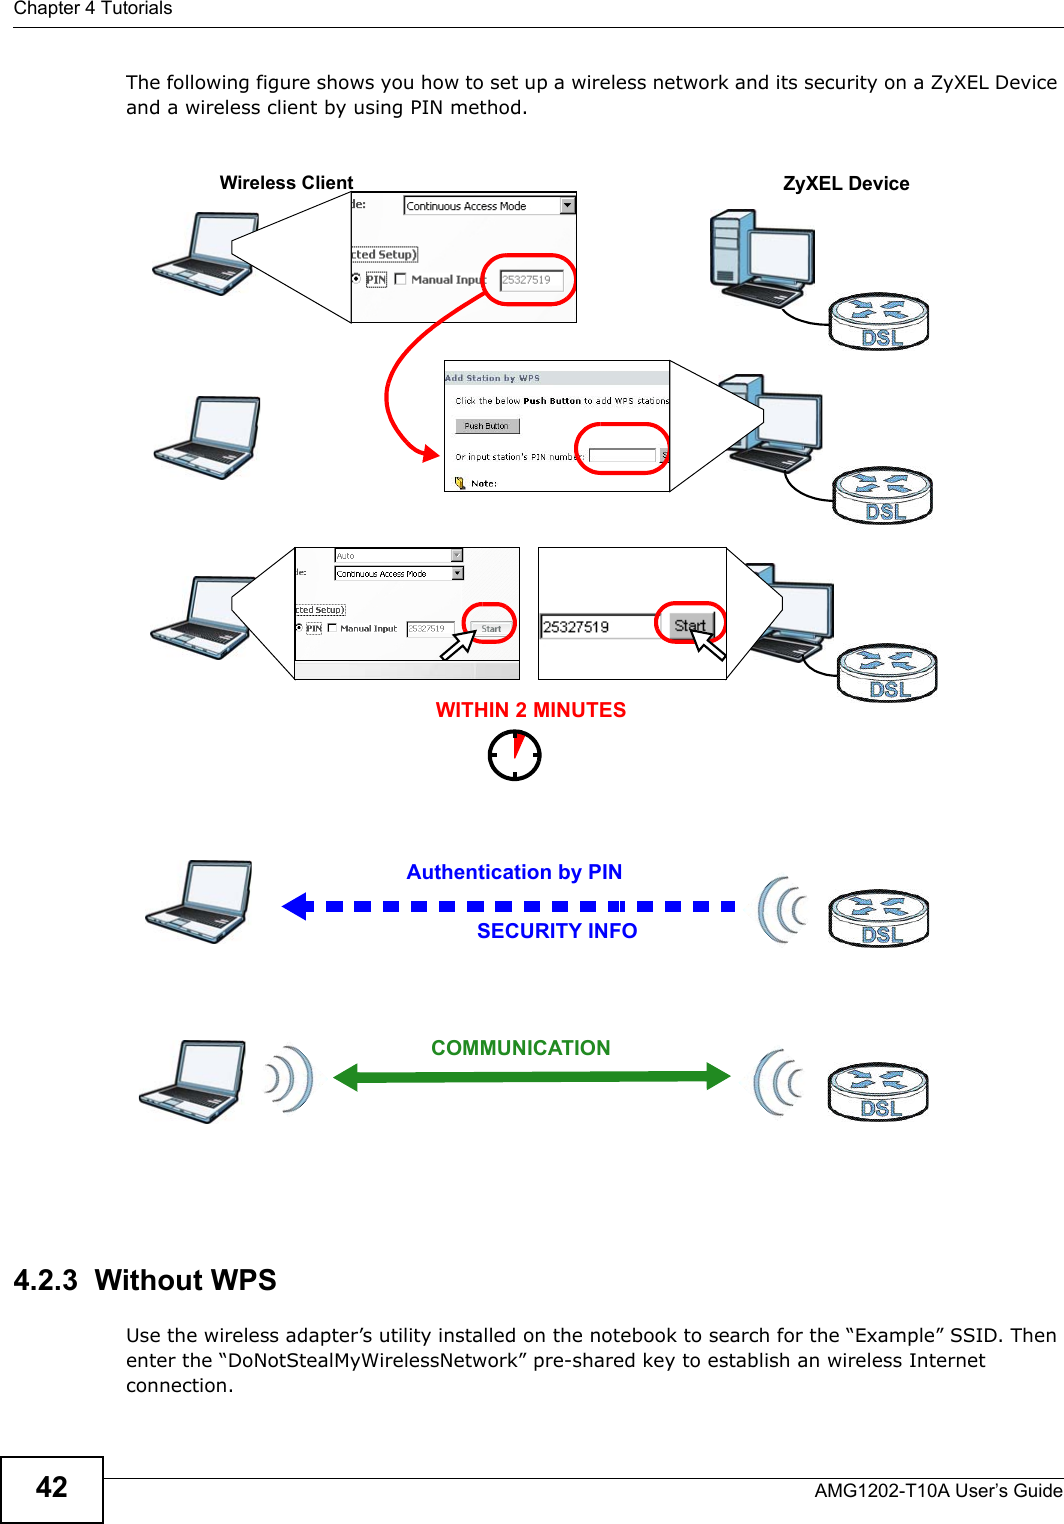 Chapter 4 TutorialsAMG1202-T10A User’s Guide42The following figure shows you how to set up a wireless network and its security on a ZyXEL Device and a wireless client by using PIN method. Example WPS Process: PIN Method4.2.3  Without WPSUse the wireless adapter’s utility installed on the notebook to search for the “Example” SSID. Then enter the “DoNotStealMyWirelessNetwork” pre-shared key to establish an wireless Internet connection.Authentication by PINSECURITY INFOWITHIN 2 MINUTESWireless ClientZyXEL DeviceCOMMUNICATION